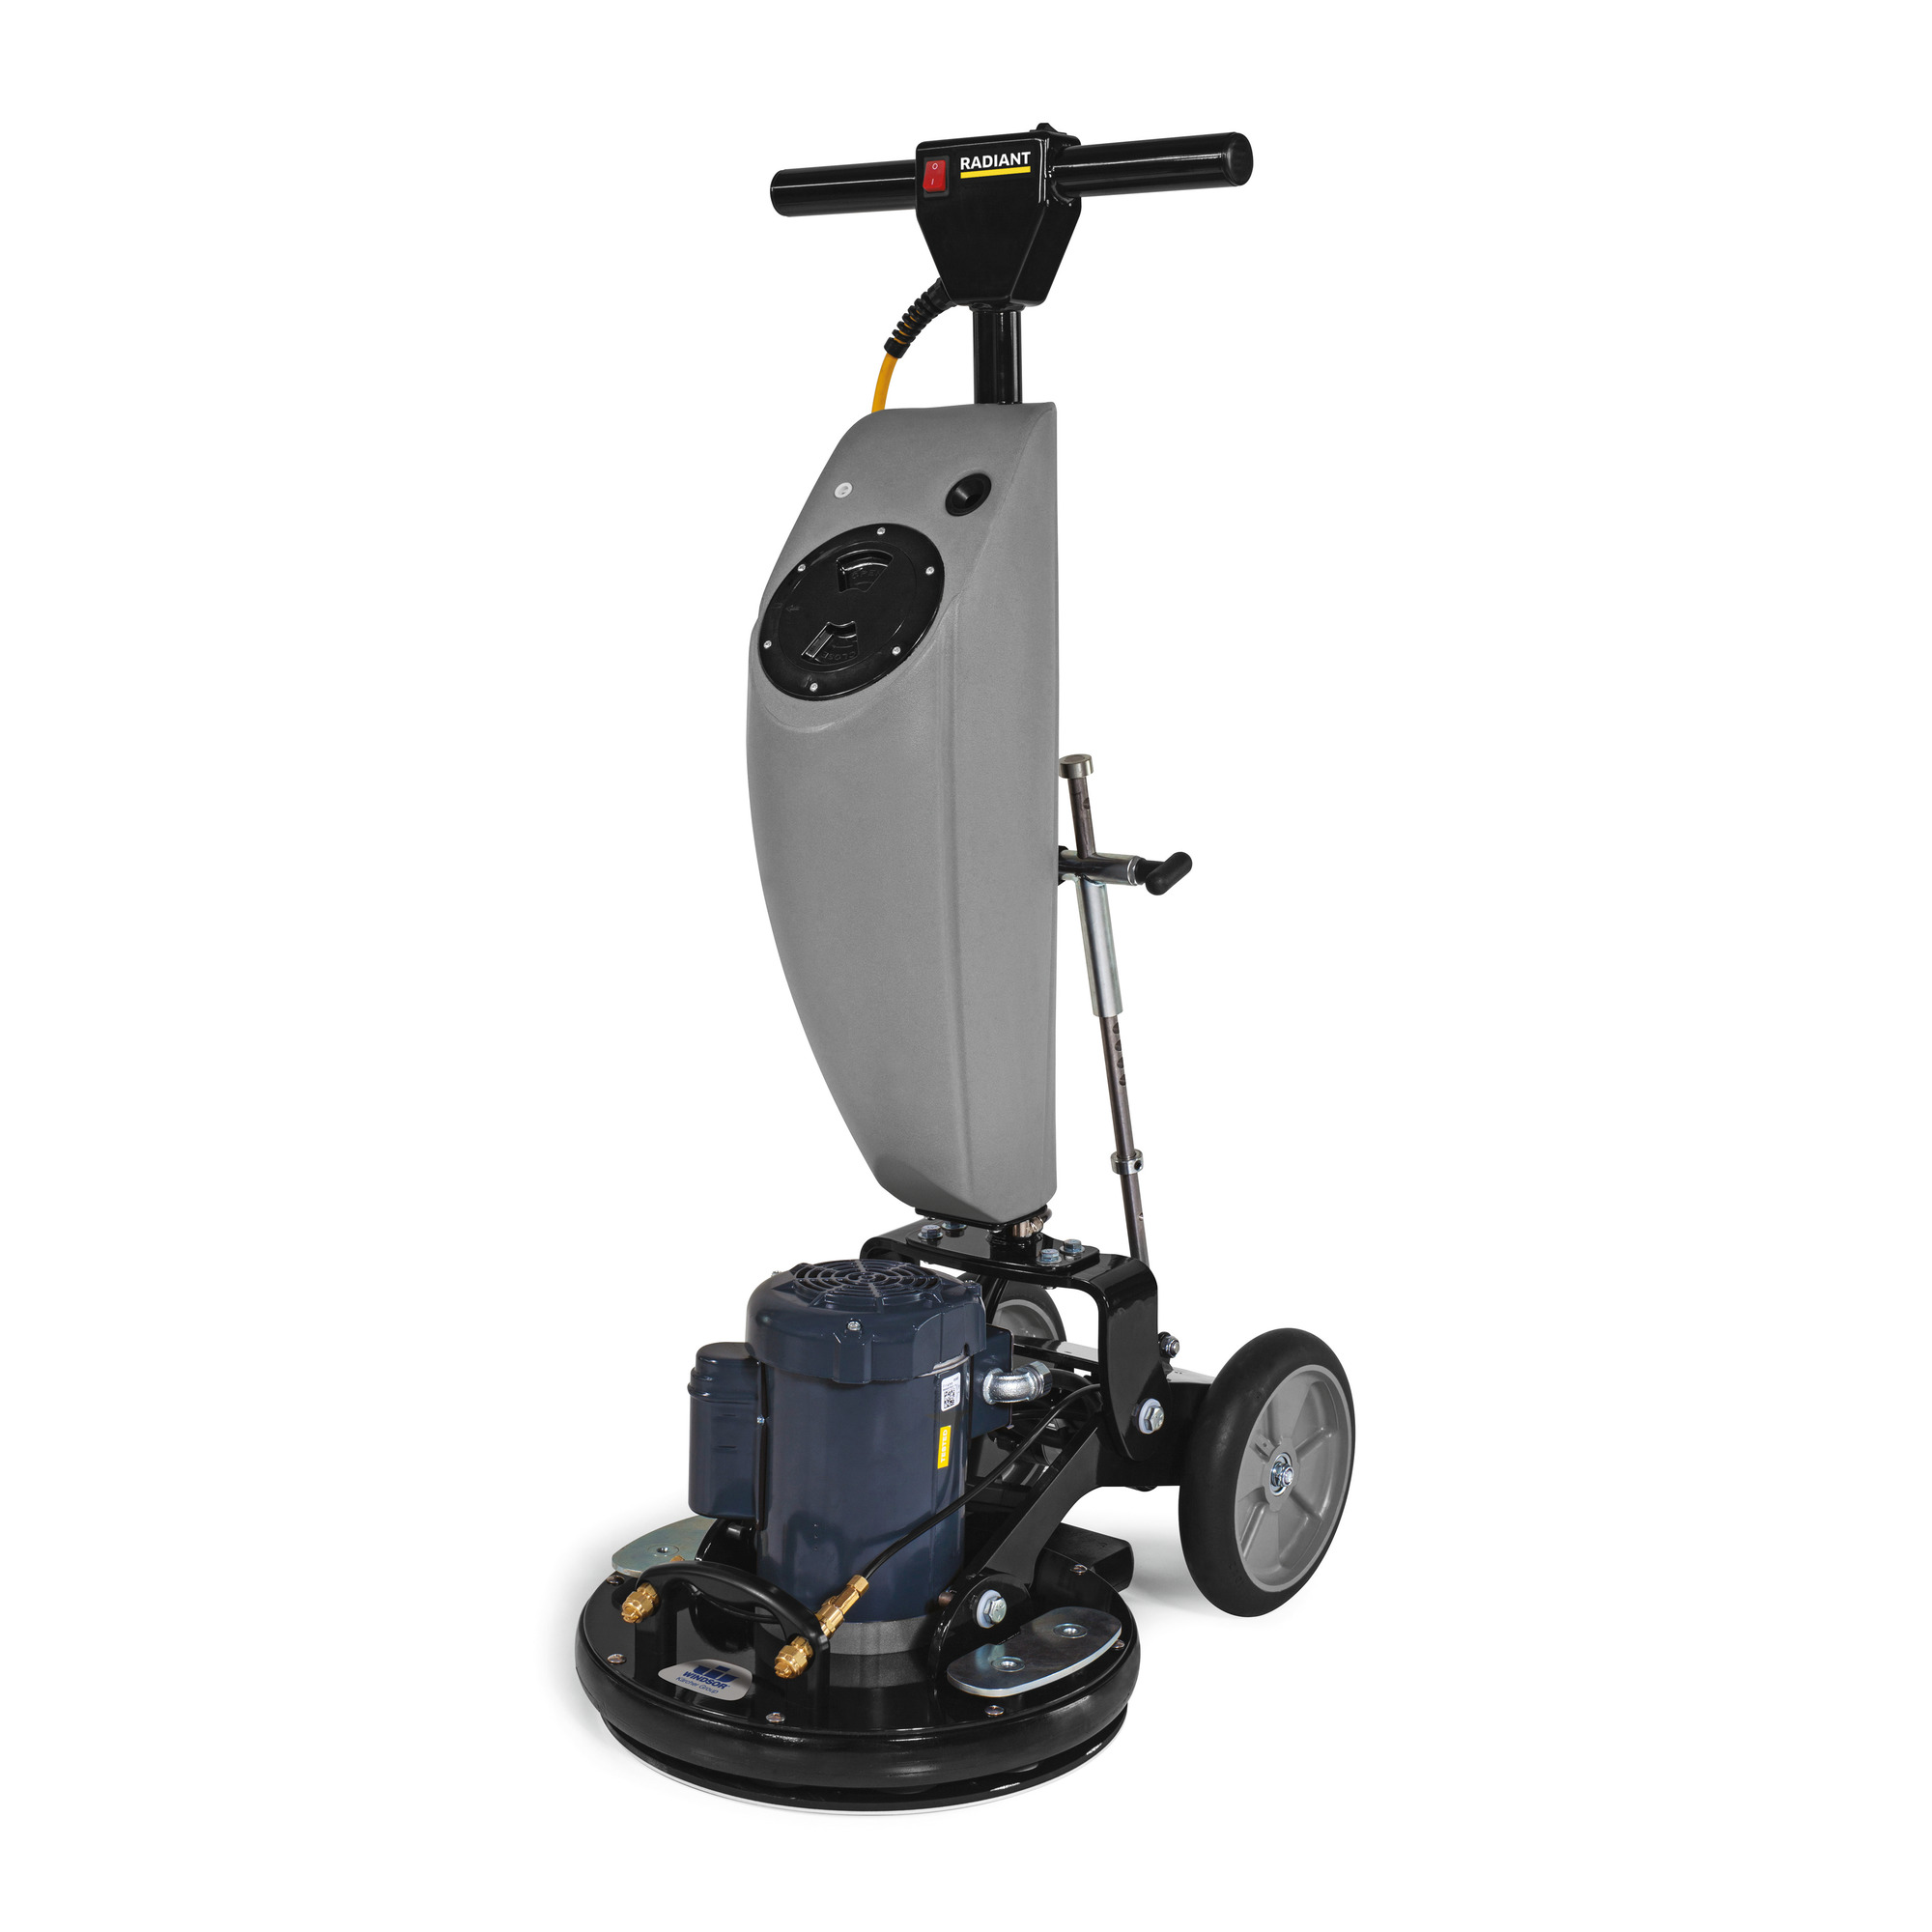 17&quot; RADIANT FLOOR MACHINE
WITH  ORB TECHNOLOGY, 17&quot; PAD
DRIVER, AND 4.75GAL SOLUTION
TANK